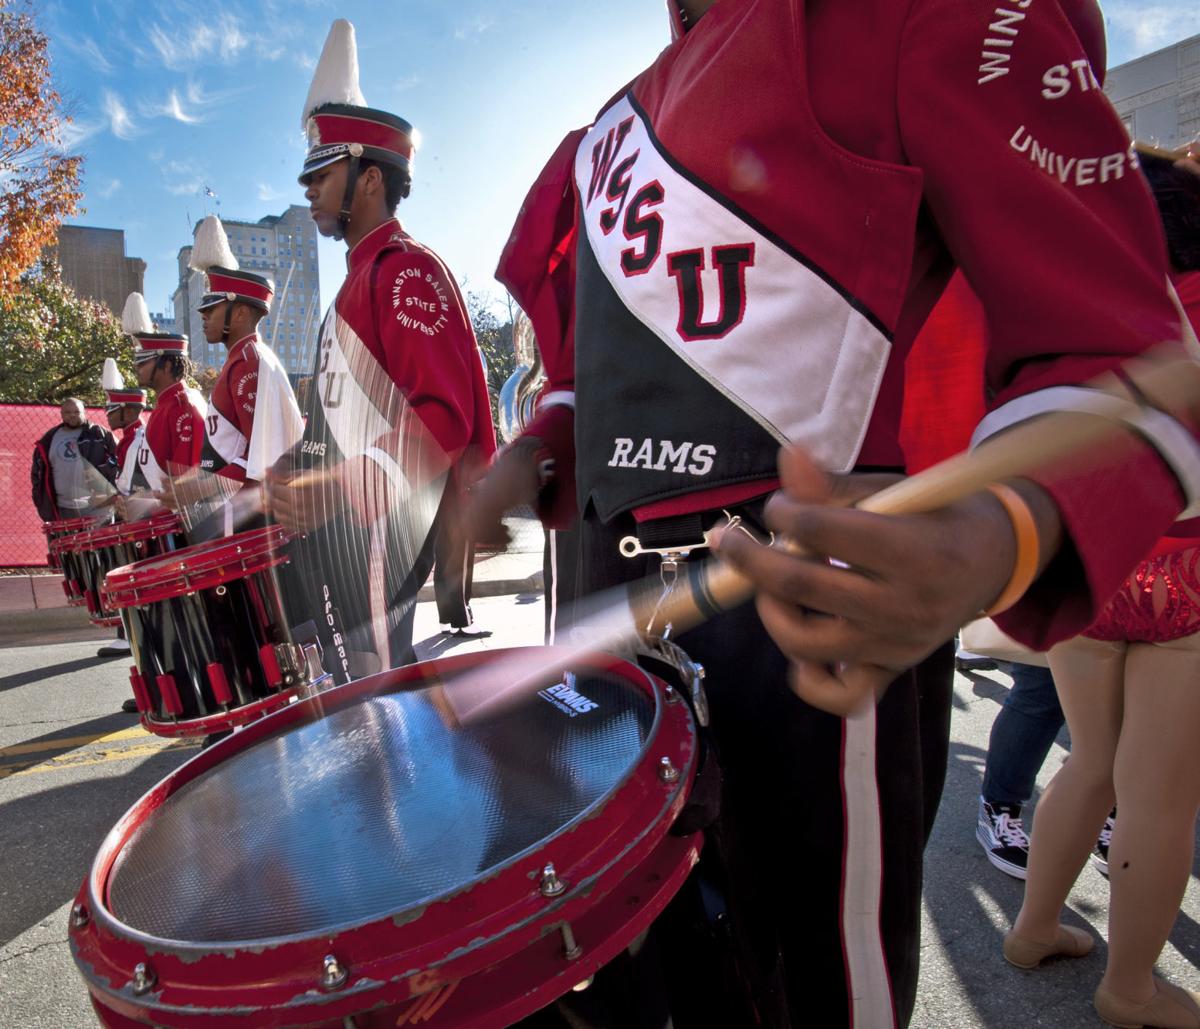 Photos: WSSU's Homecoming Parades over the years